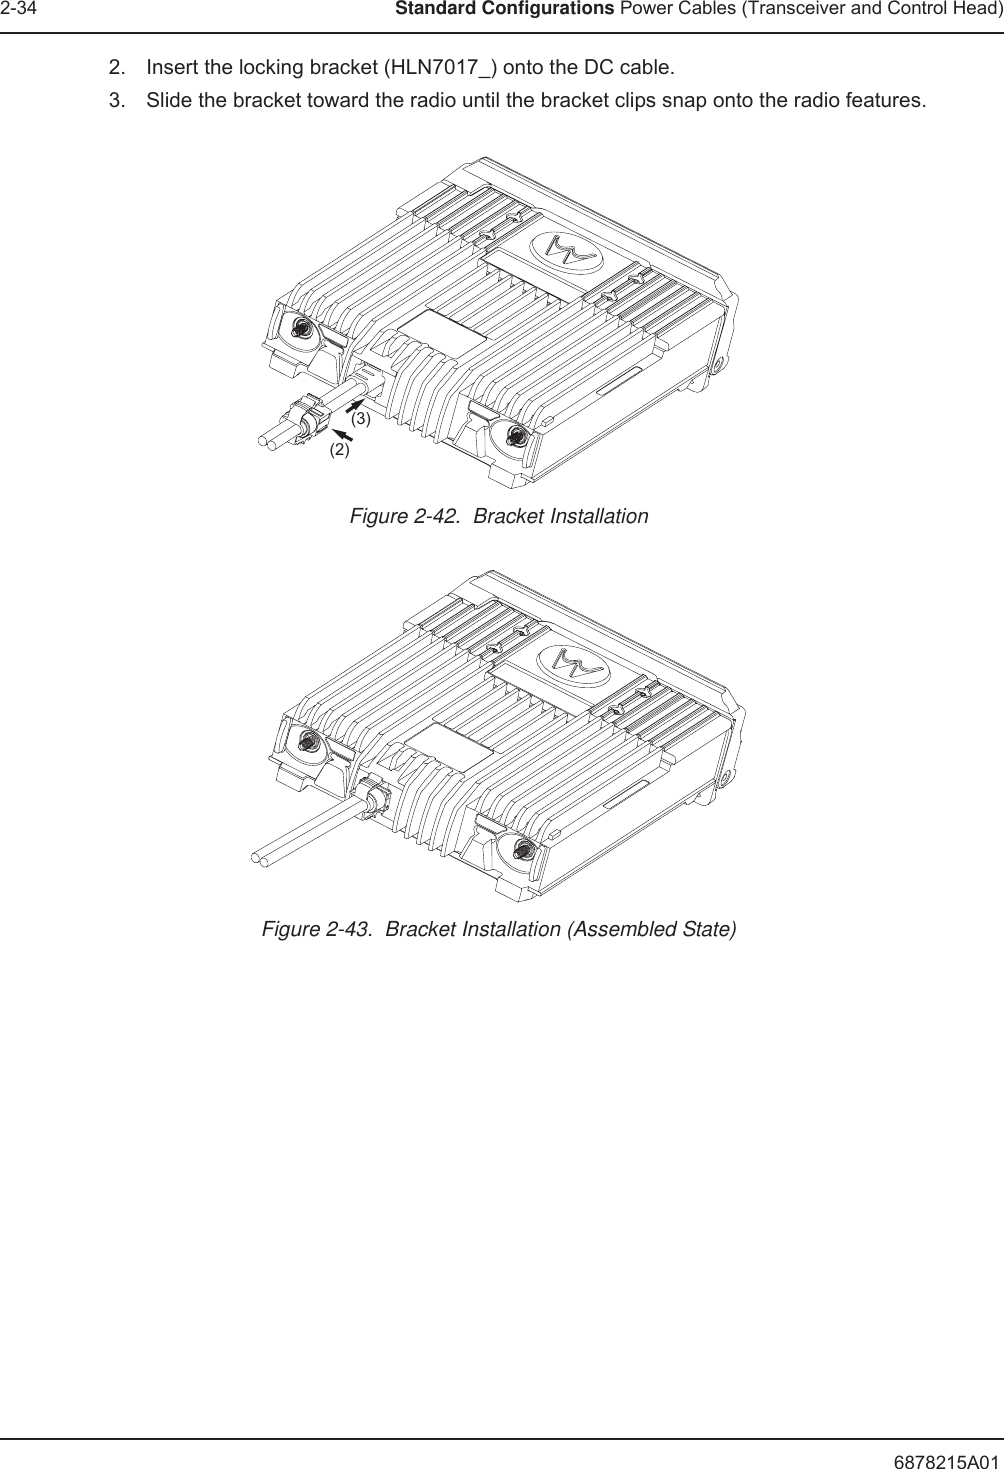 6878215A012-34 Standard Configurations Power Cables (Transceiver and Control Head)2. Insert the locking bracket (HLN7017_) onto the DC cable.3. Slide the bracket toward the radio until the bracket clips snap onto the radio features.Figure 2-42.  Bracket InstallationFigure 2-43.  Bracket Installation (Assembled State)(3)(2)